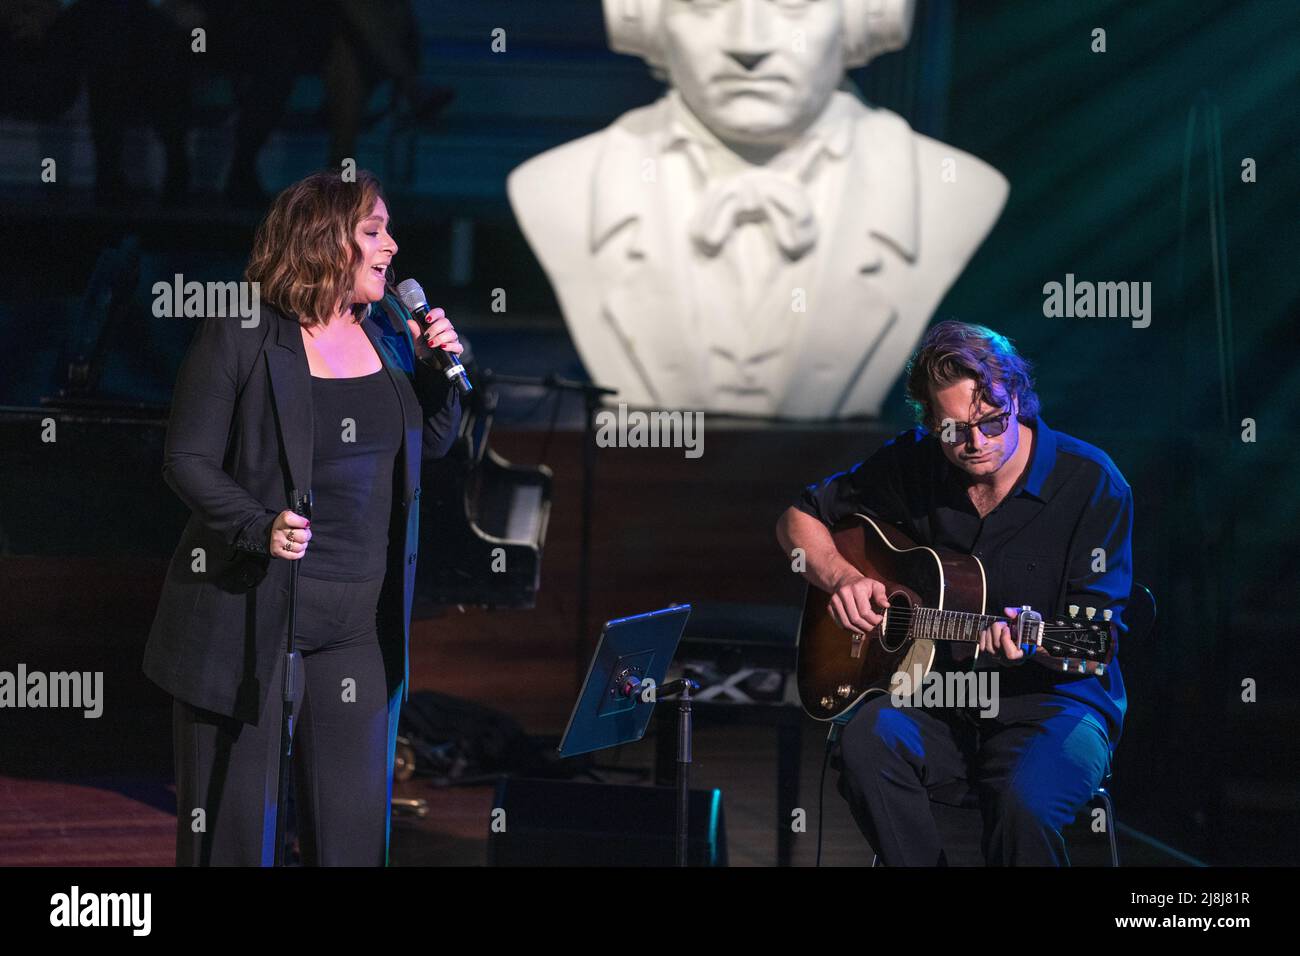 2022-05-16 17:24:05 BUSSUM - Trijntje Oosterhuis and Xander Vrienten perform together during the presentation of the Buma Awards in Spant. The Lennart Nijgh Prize was awarded posthumously to Henny Vrienten. The awards are presented to composers, lyricists and their music publishers in various categories. ANP JEROEN JUMELET netherlands out - belgium out Stock Photo